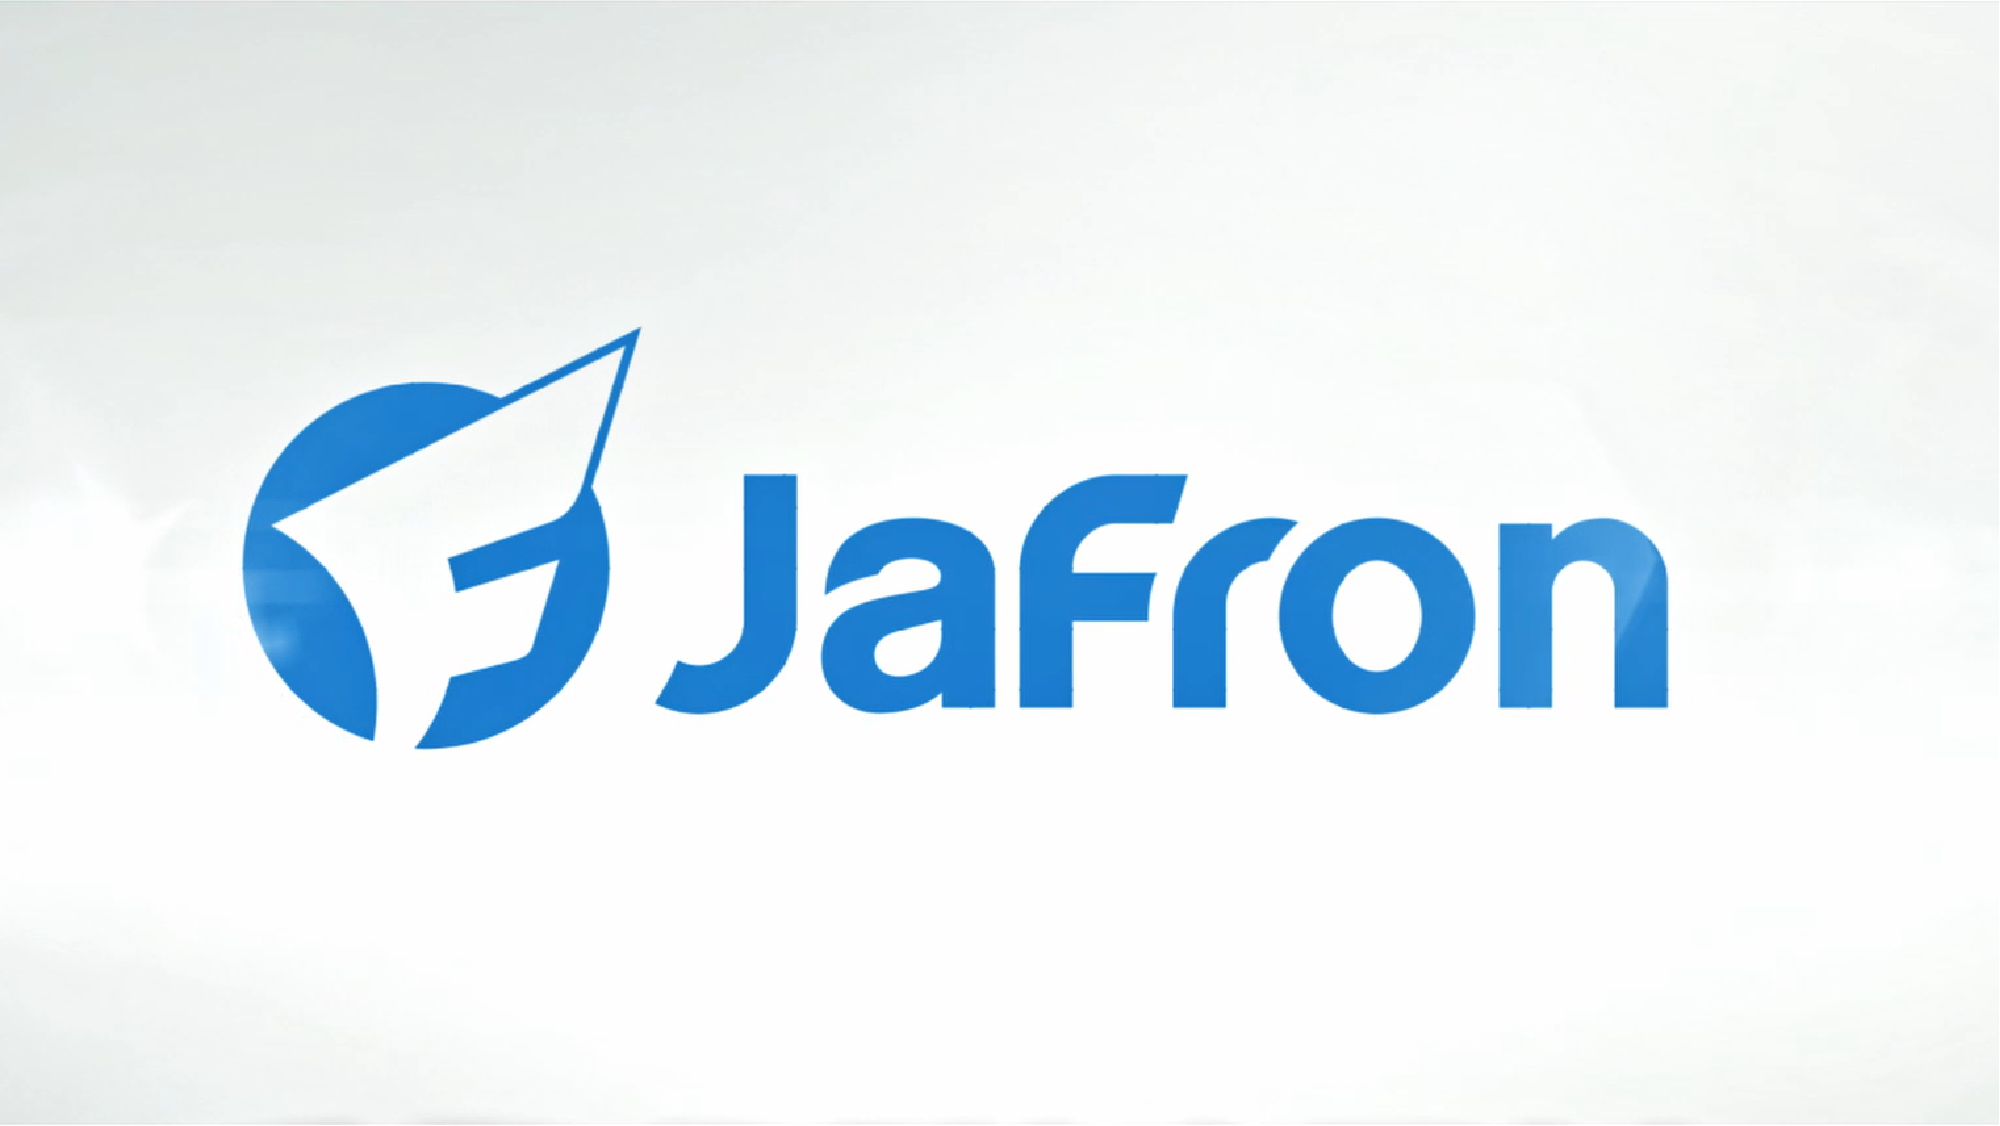 Jafron Corporate Introduction